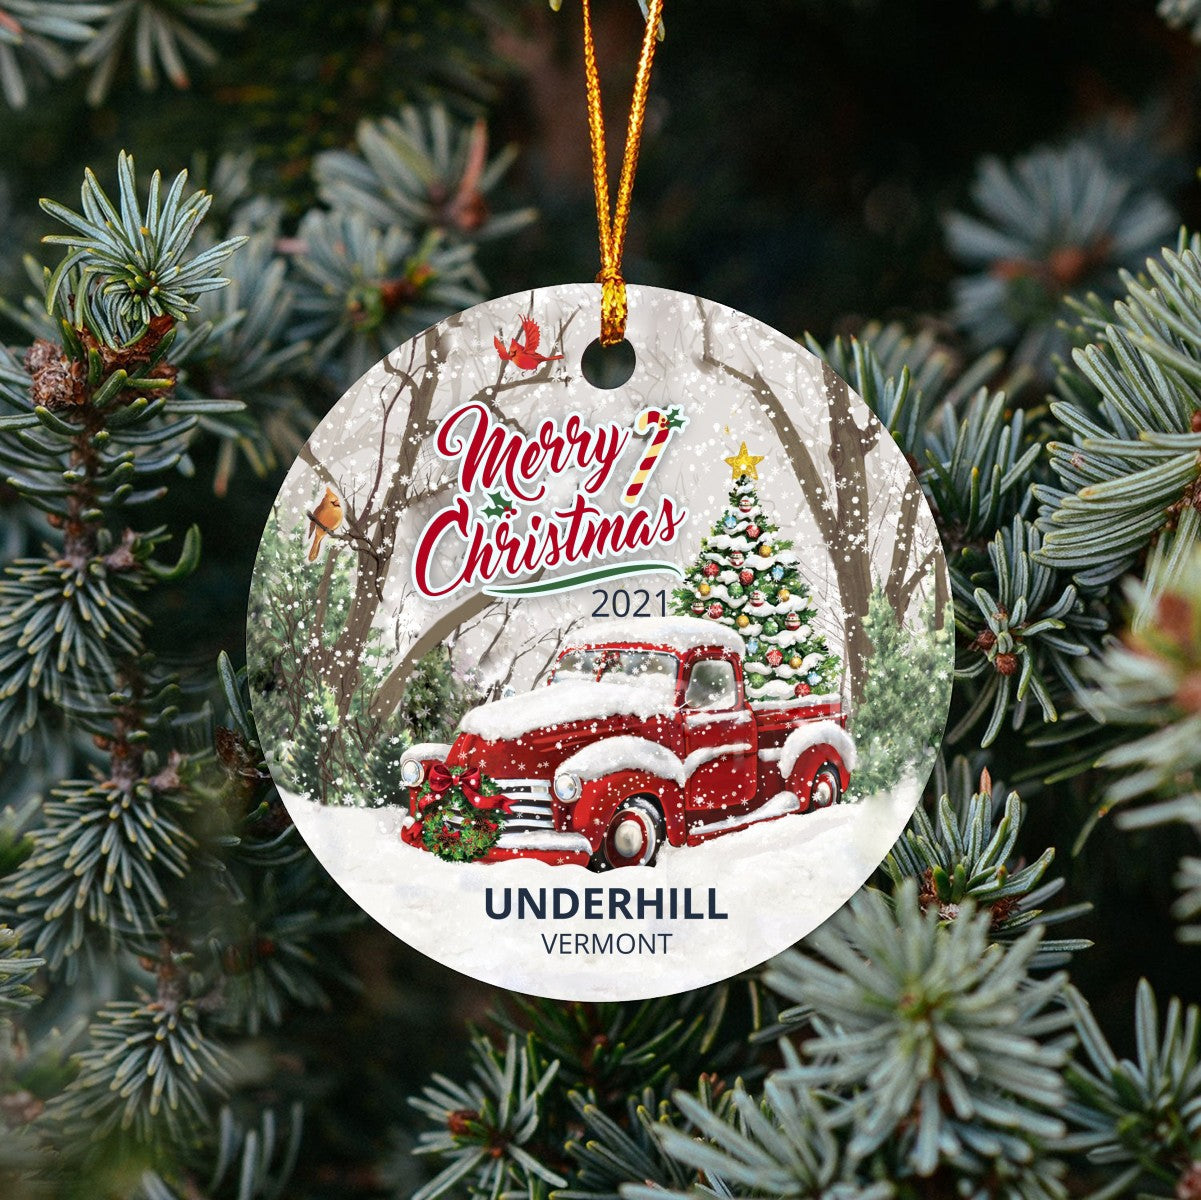 Christmas Tree Ornaments Underhill - Ornament With Name City, State Underhill Vermont VT Ornament - Red Truck Xmas Ornaments 3'' Plastic Gift For Family, Friend And Housewarming